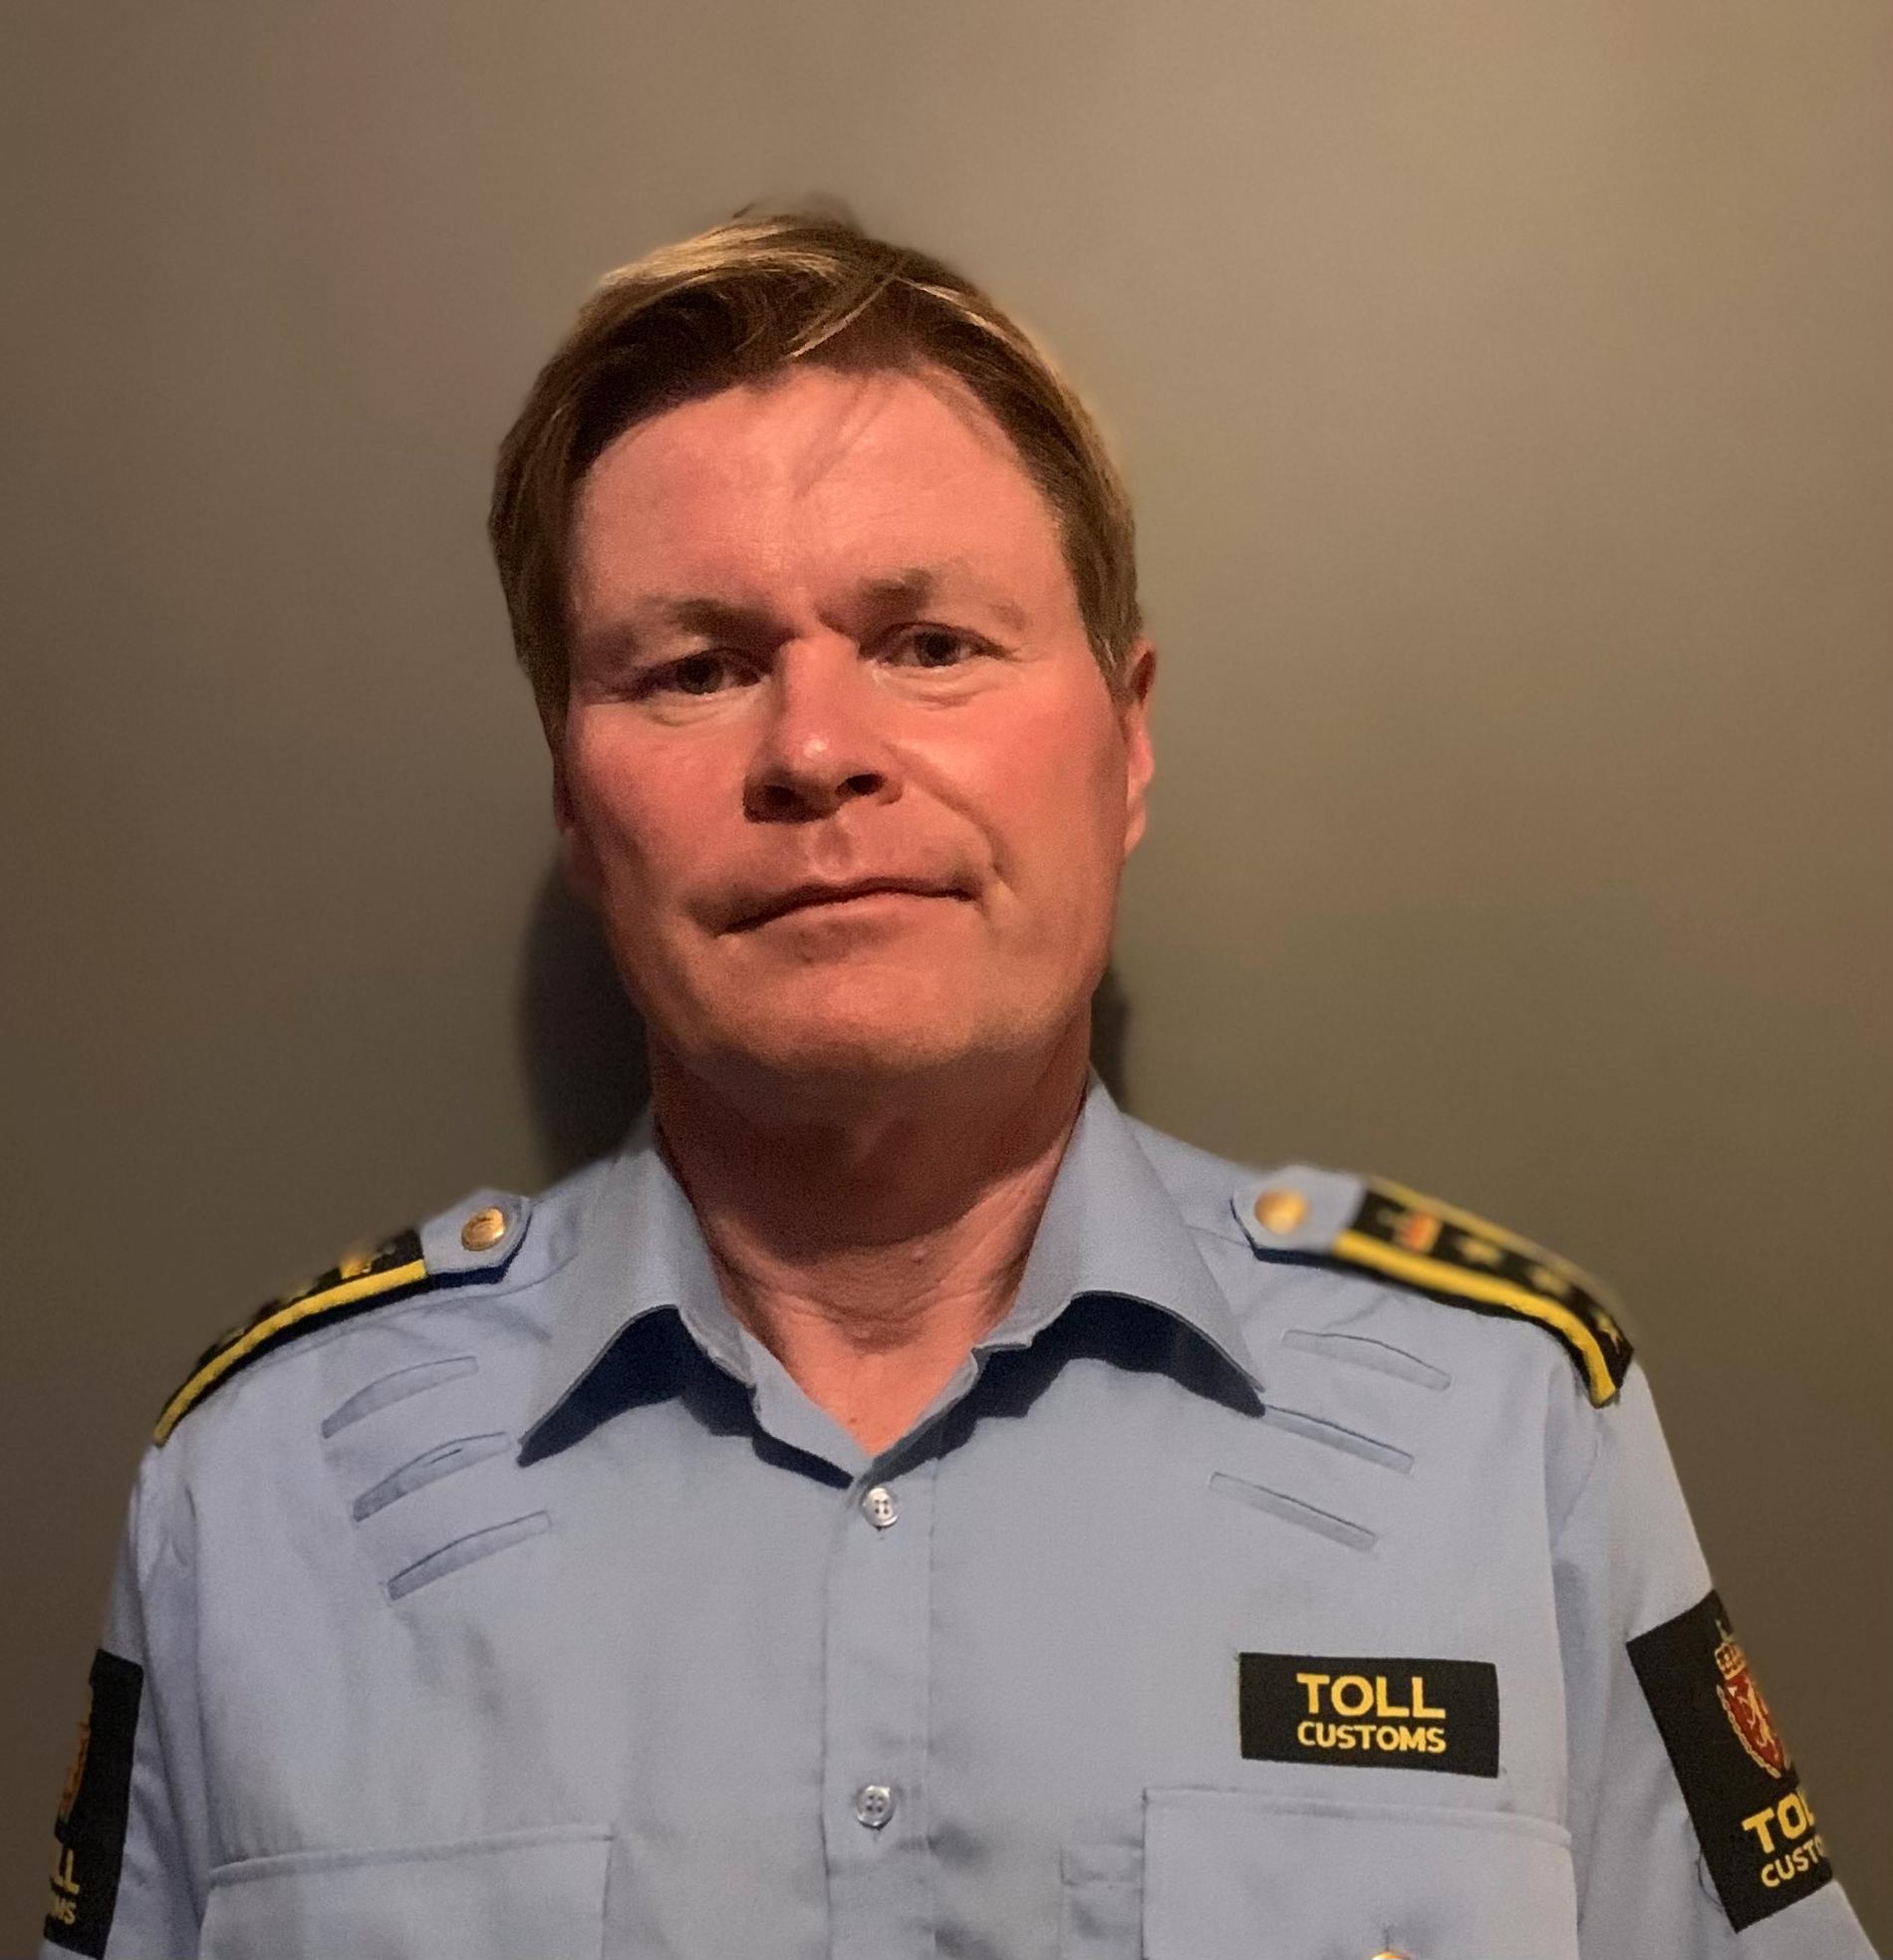 ILLEGAL IMPORT: Kjetil Lundeberg, section manager at the Sandsfjord customs office, described the seizure as very unusual.